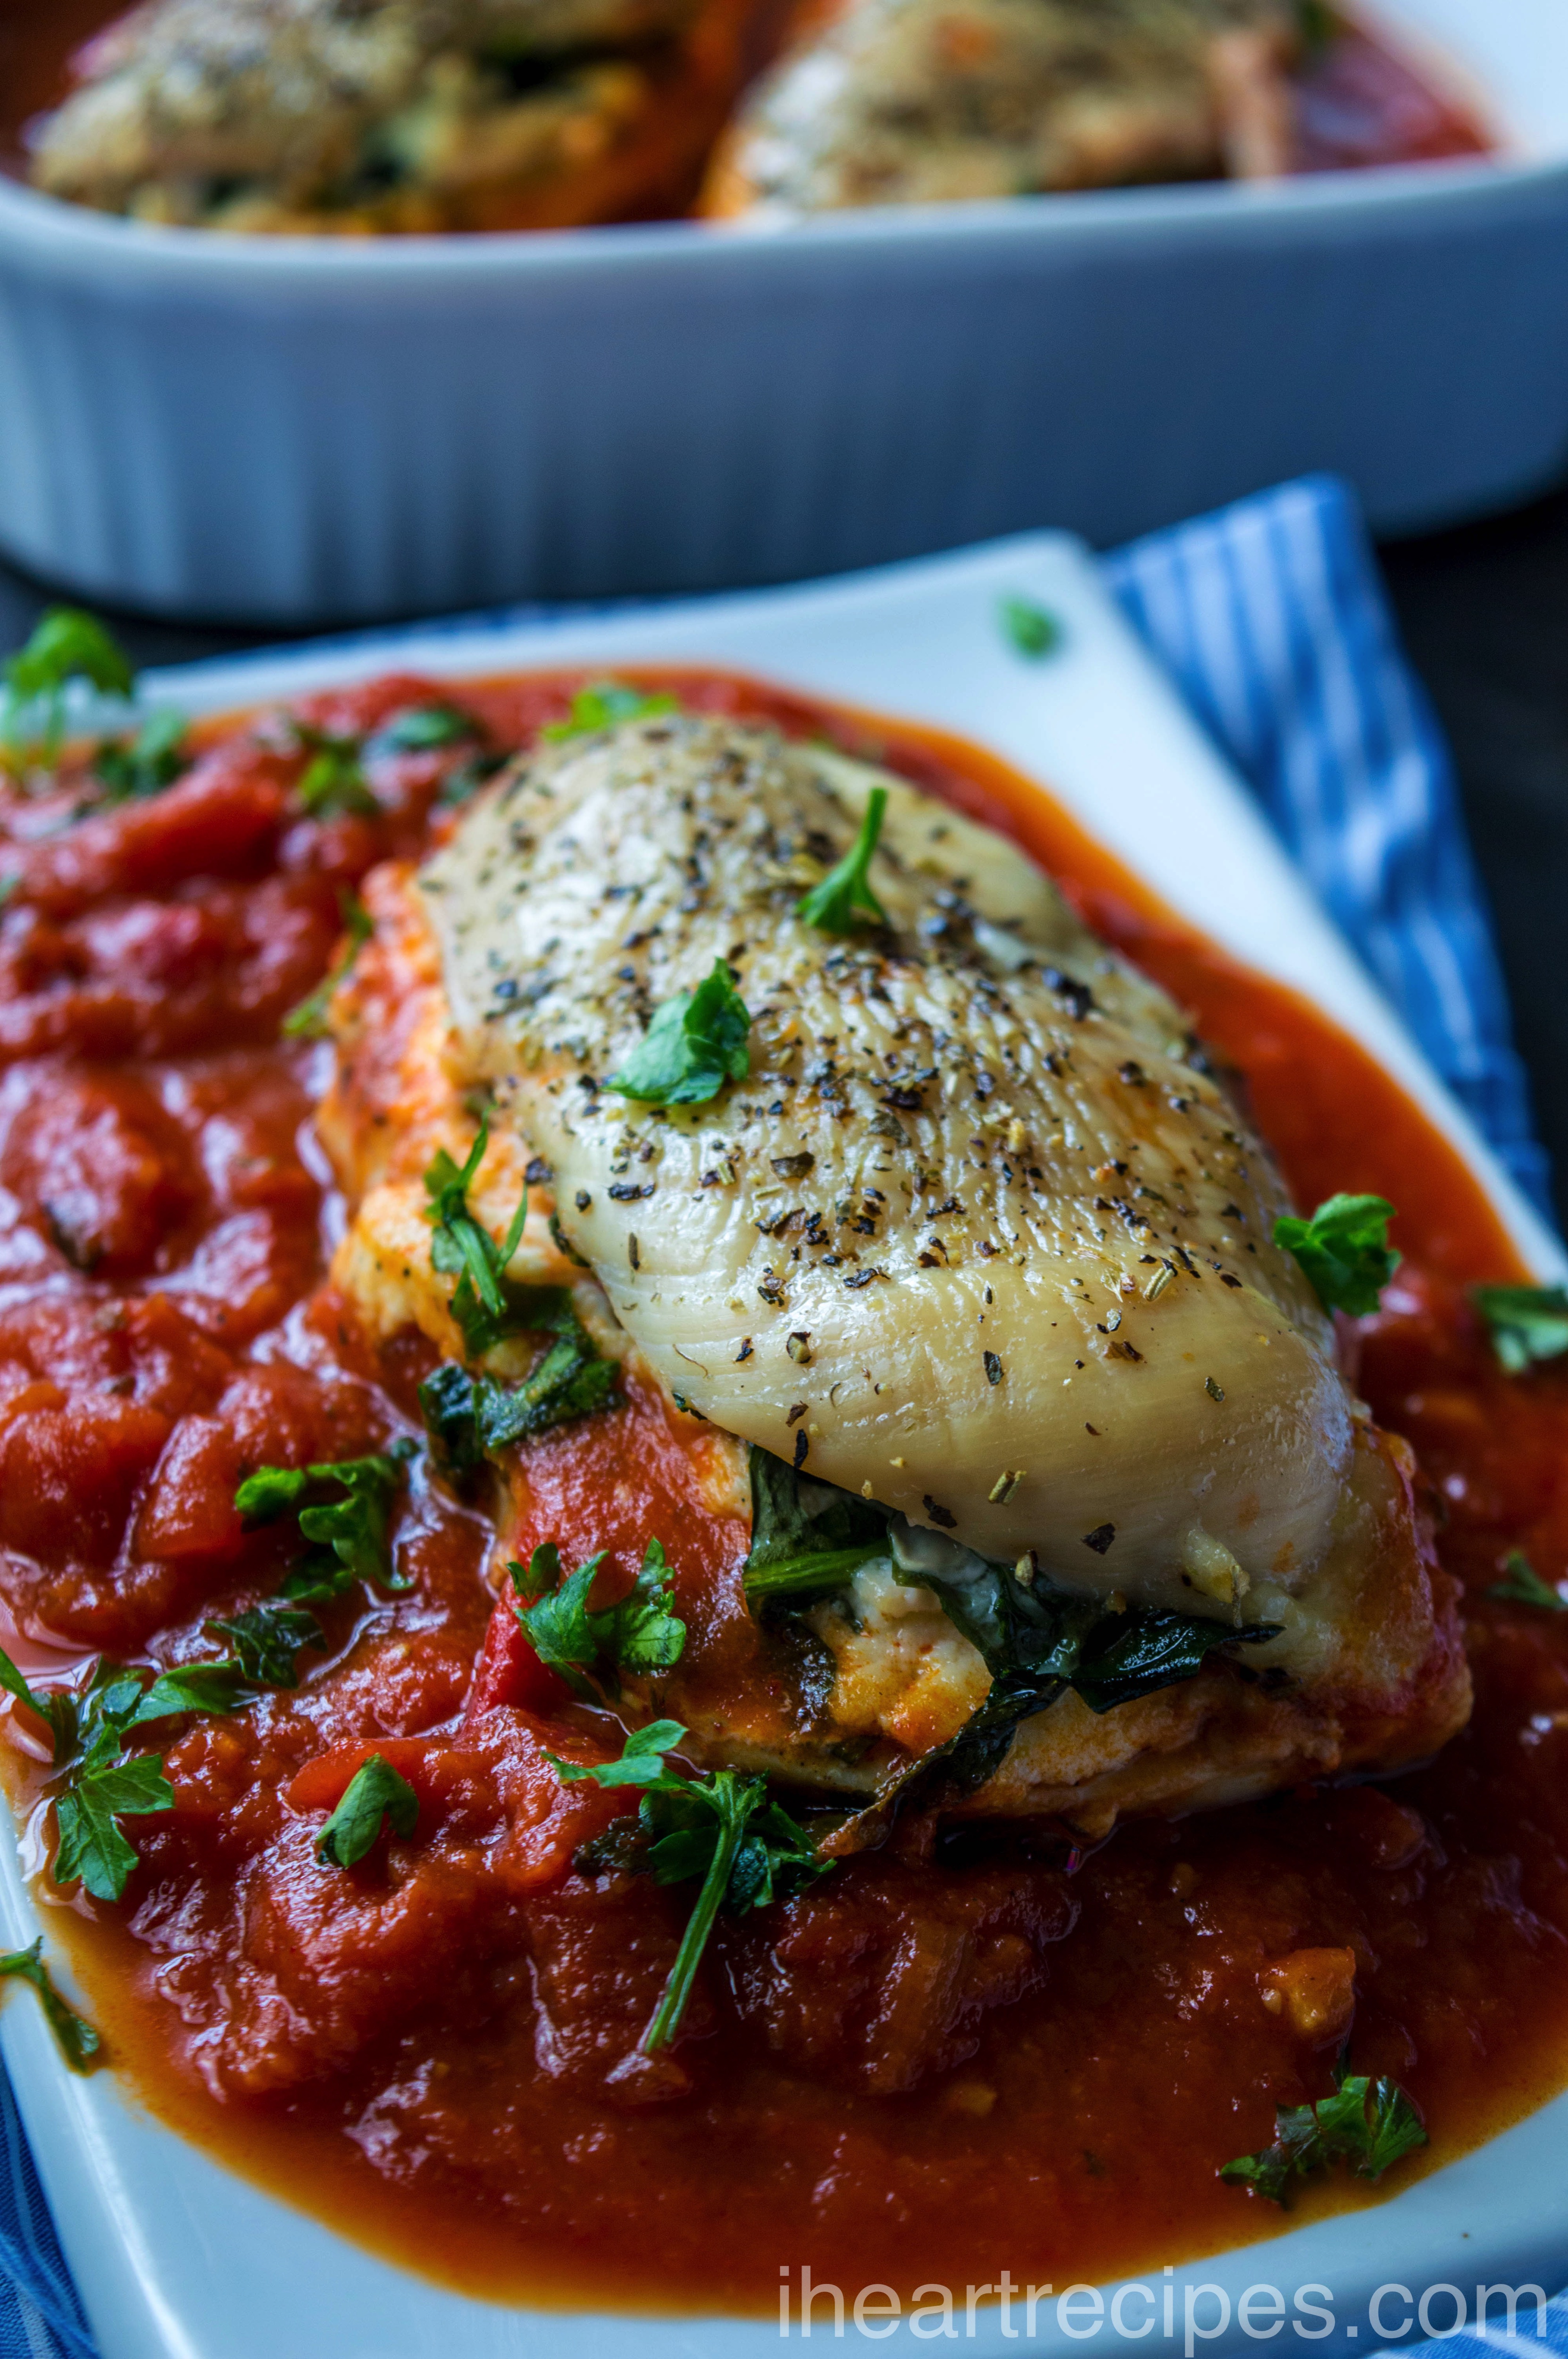 Tender and juicy stuffed chicken with a creamy ricotta cheese and spinach mixture, slow cooked in marinara sauce